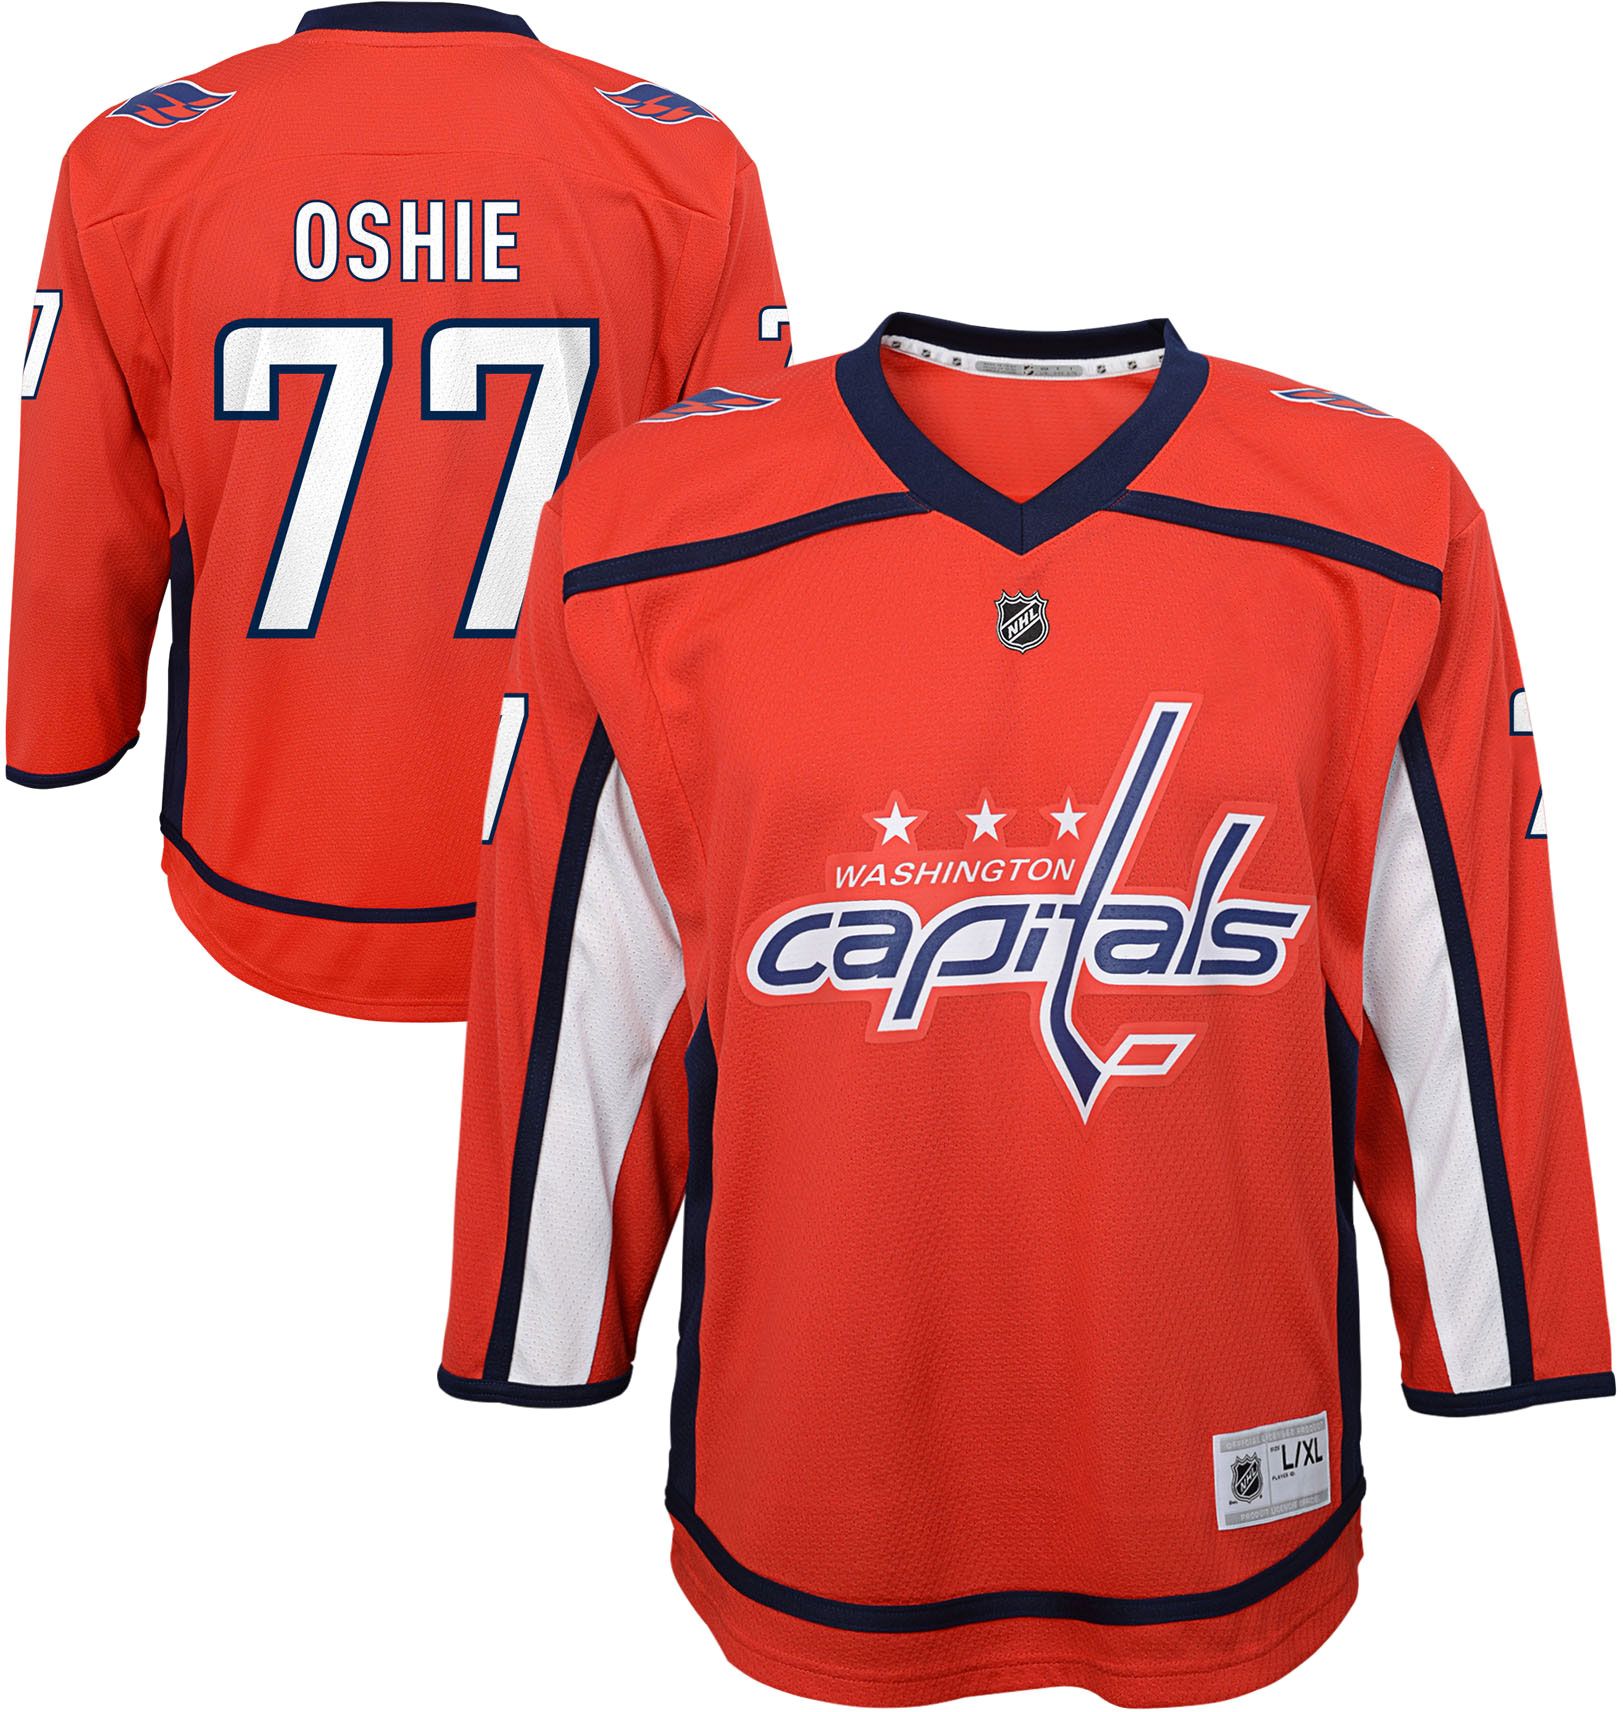 tj oshie jersey youth